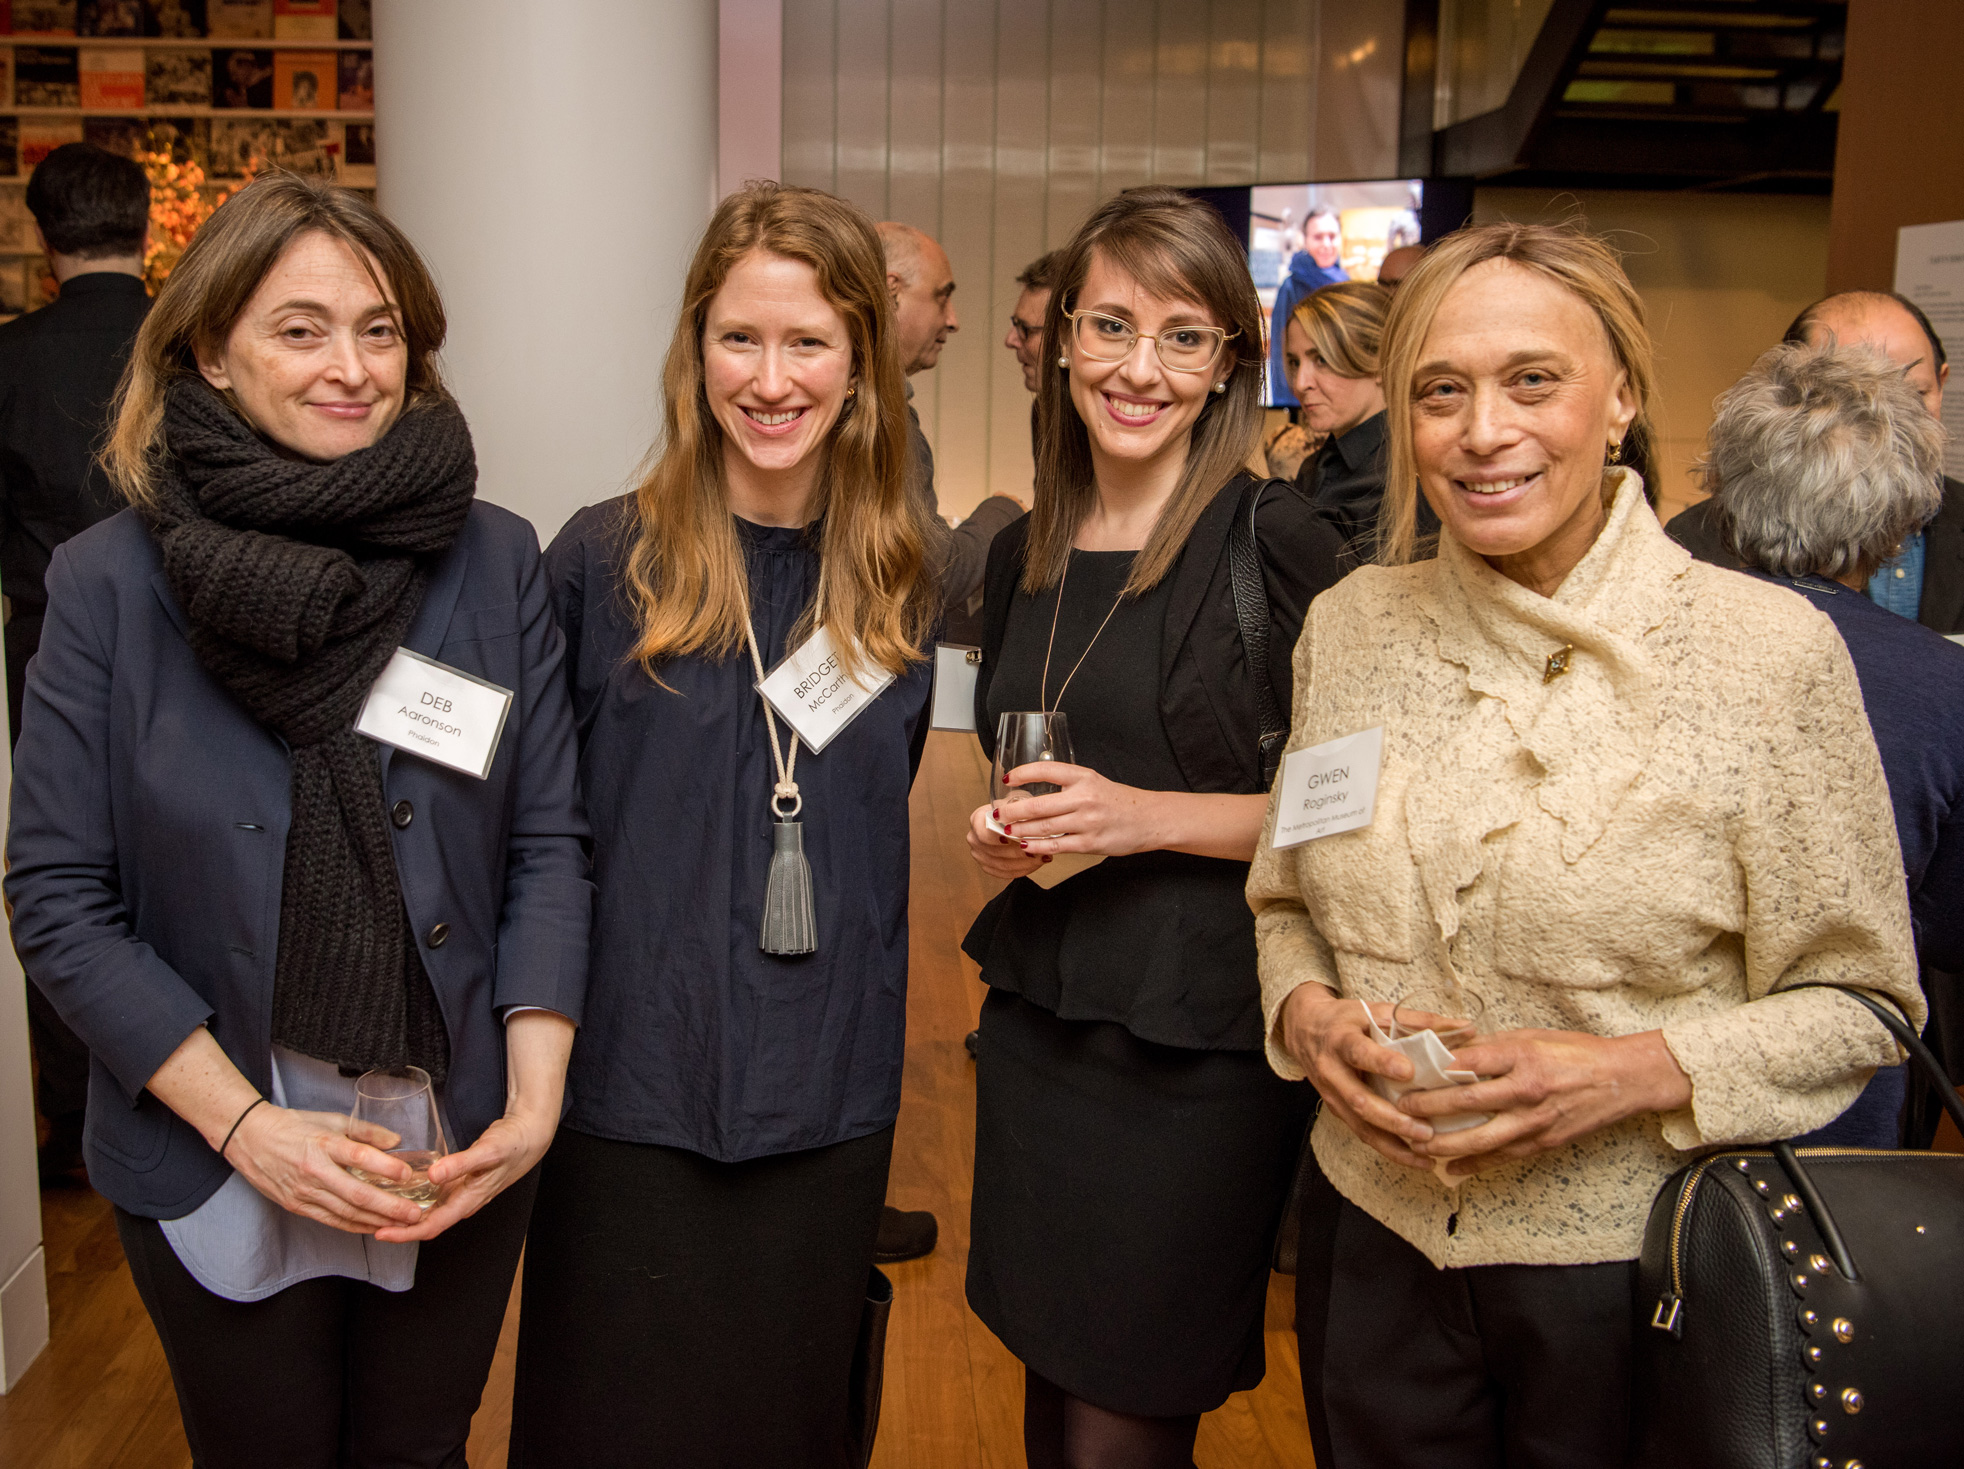 Phaidon's Group Publisher Deb Aaronson and Assistant Editor Bridget McCarthy with The Met Museum’s Publishing and Marketing Assistant Rachel High and Associate Publisher Gwen Roginsky